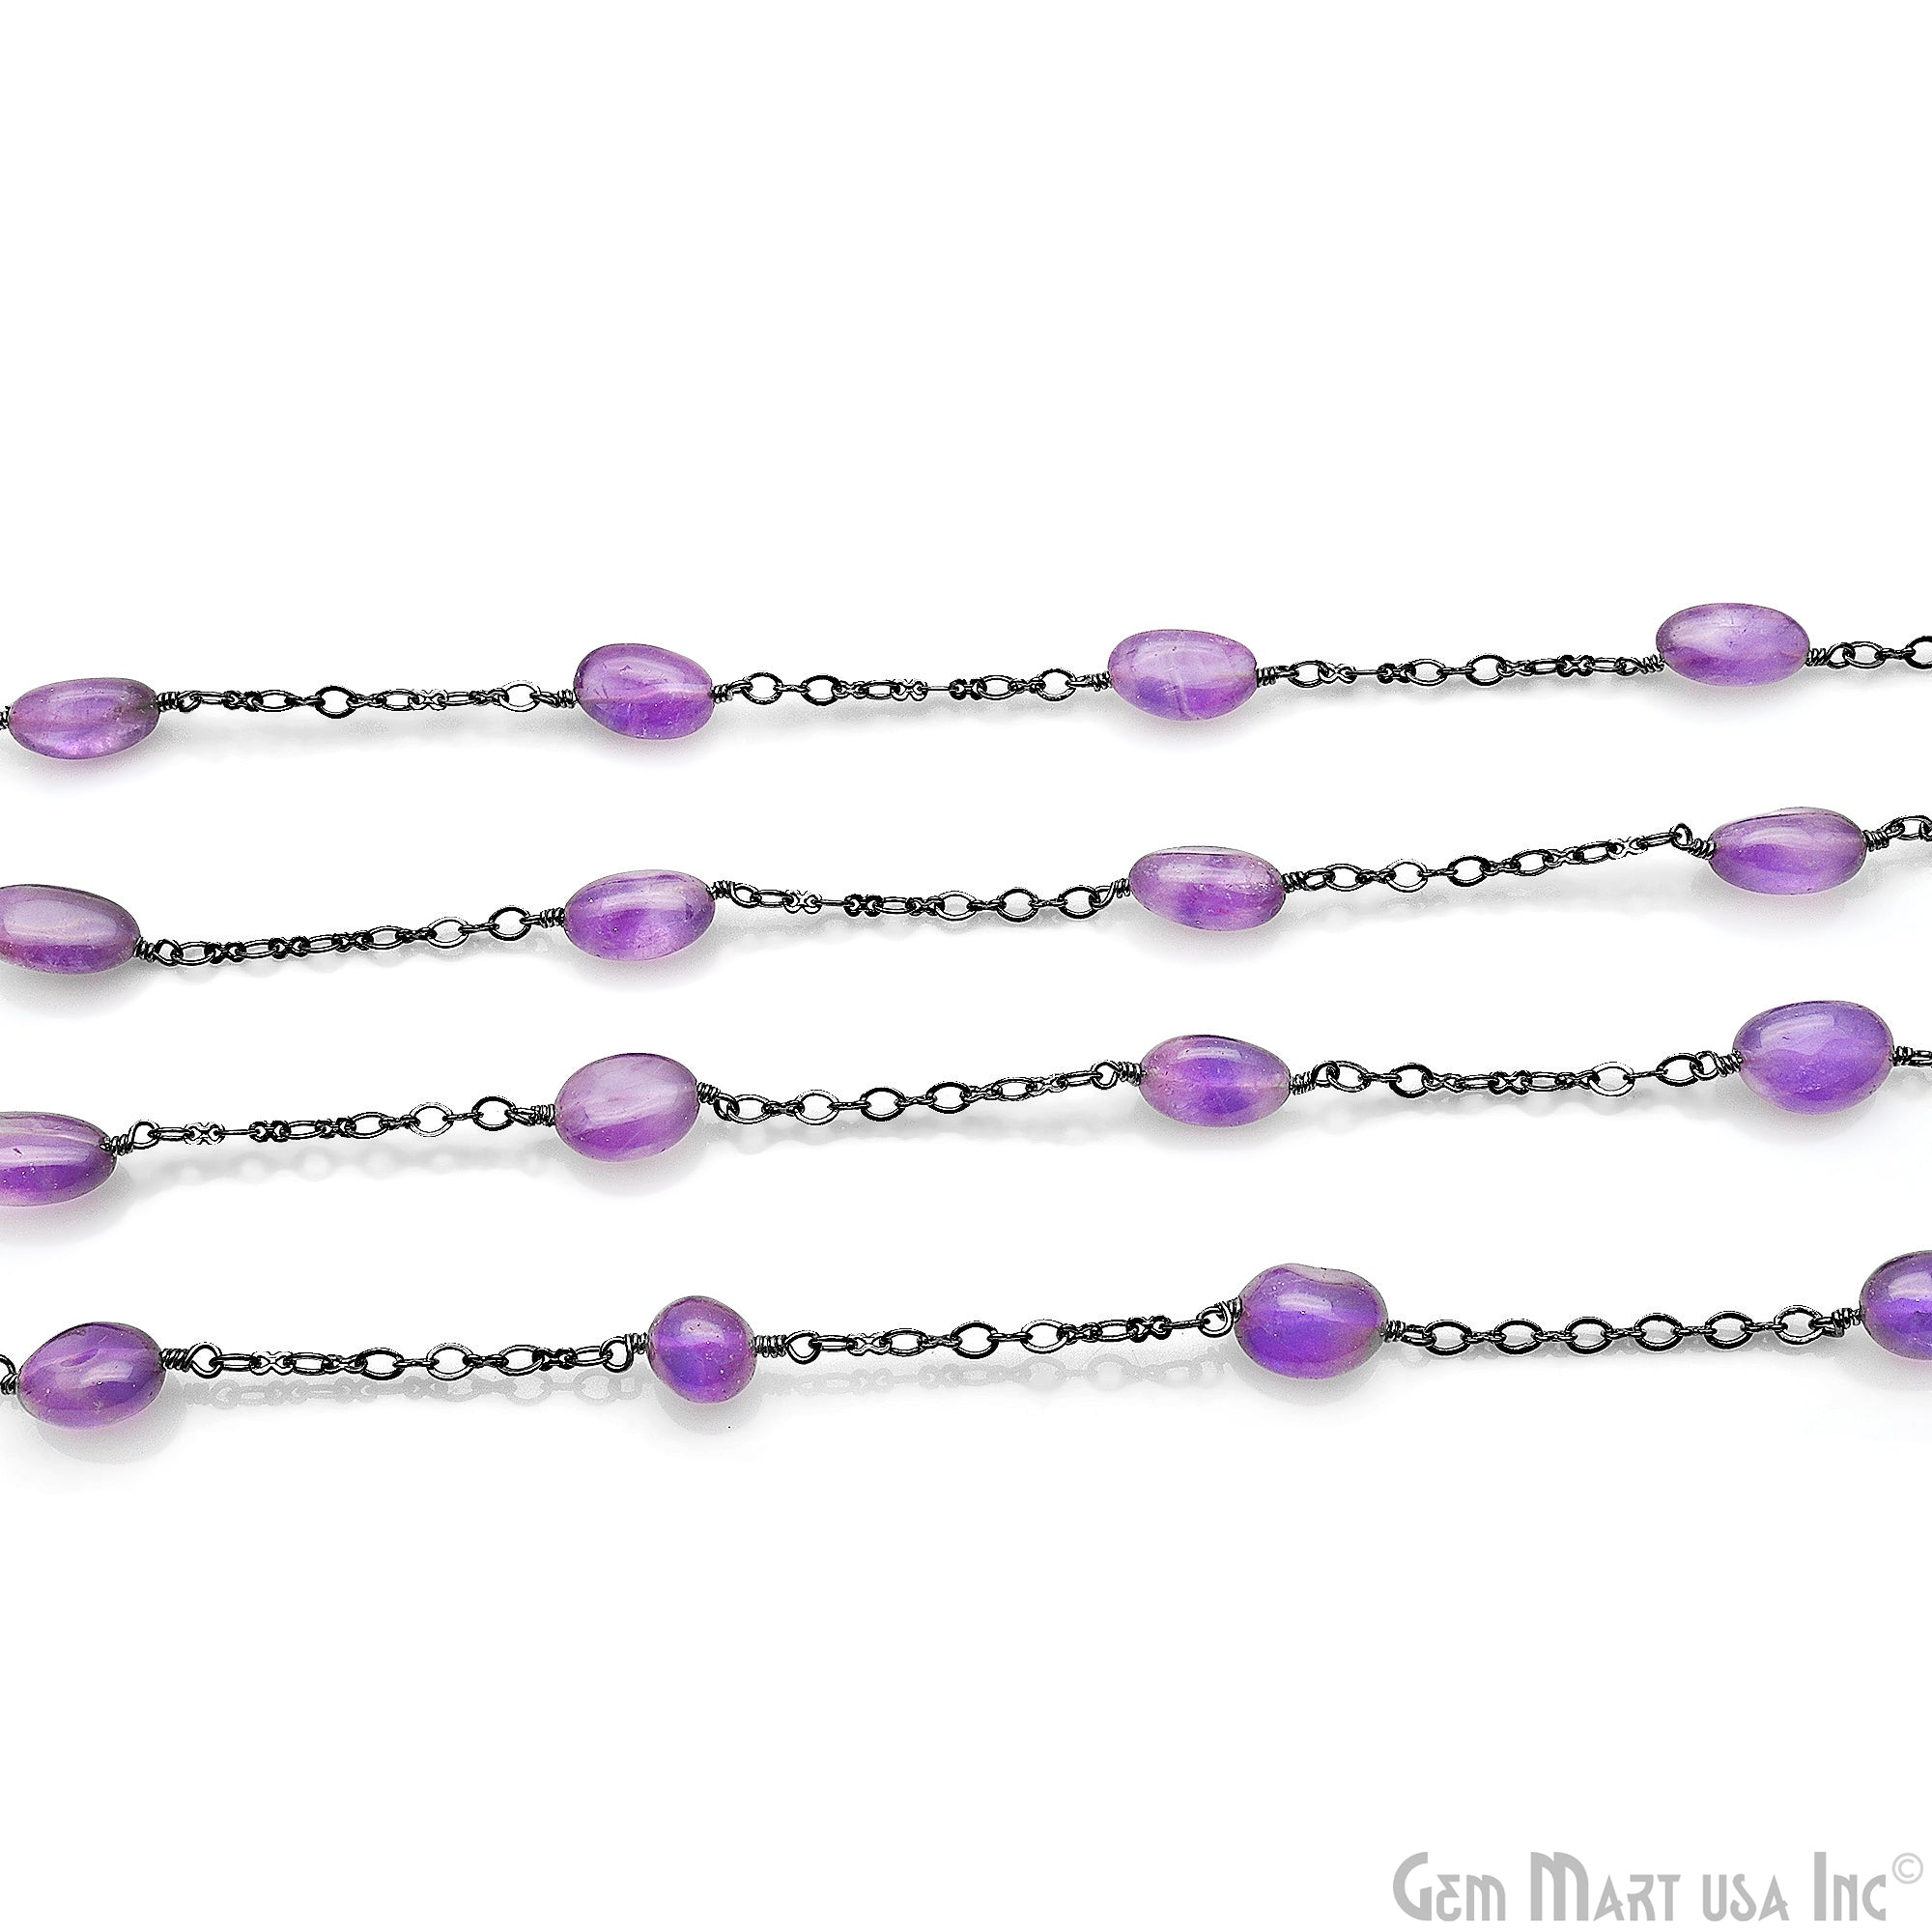 Amethyst Tumble Beads 10x6mm Oxidized Wire Wrapped Rosary Chain